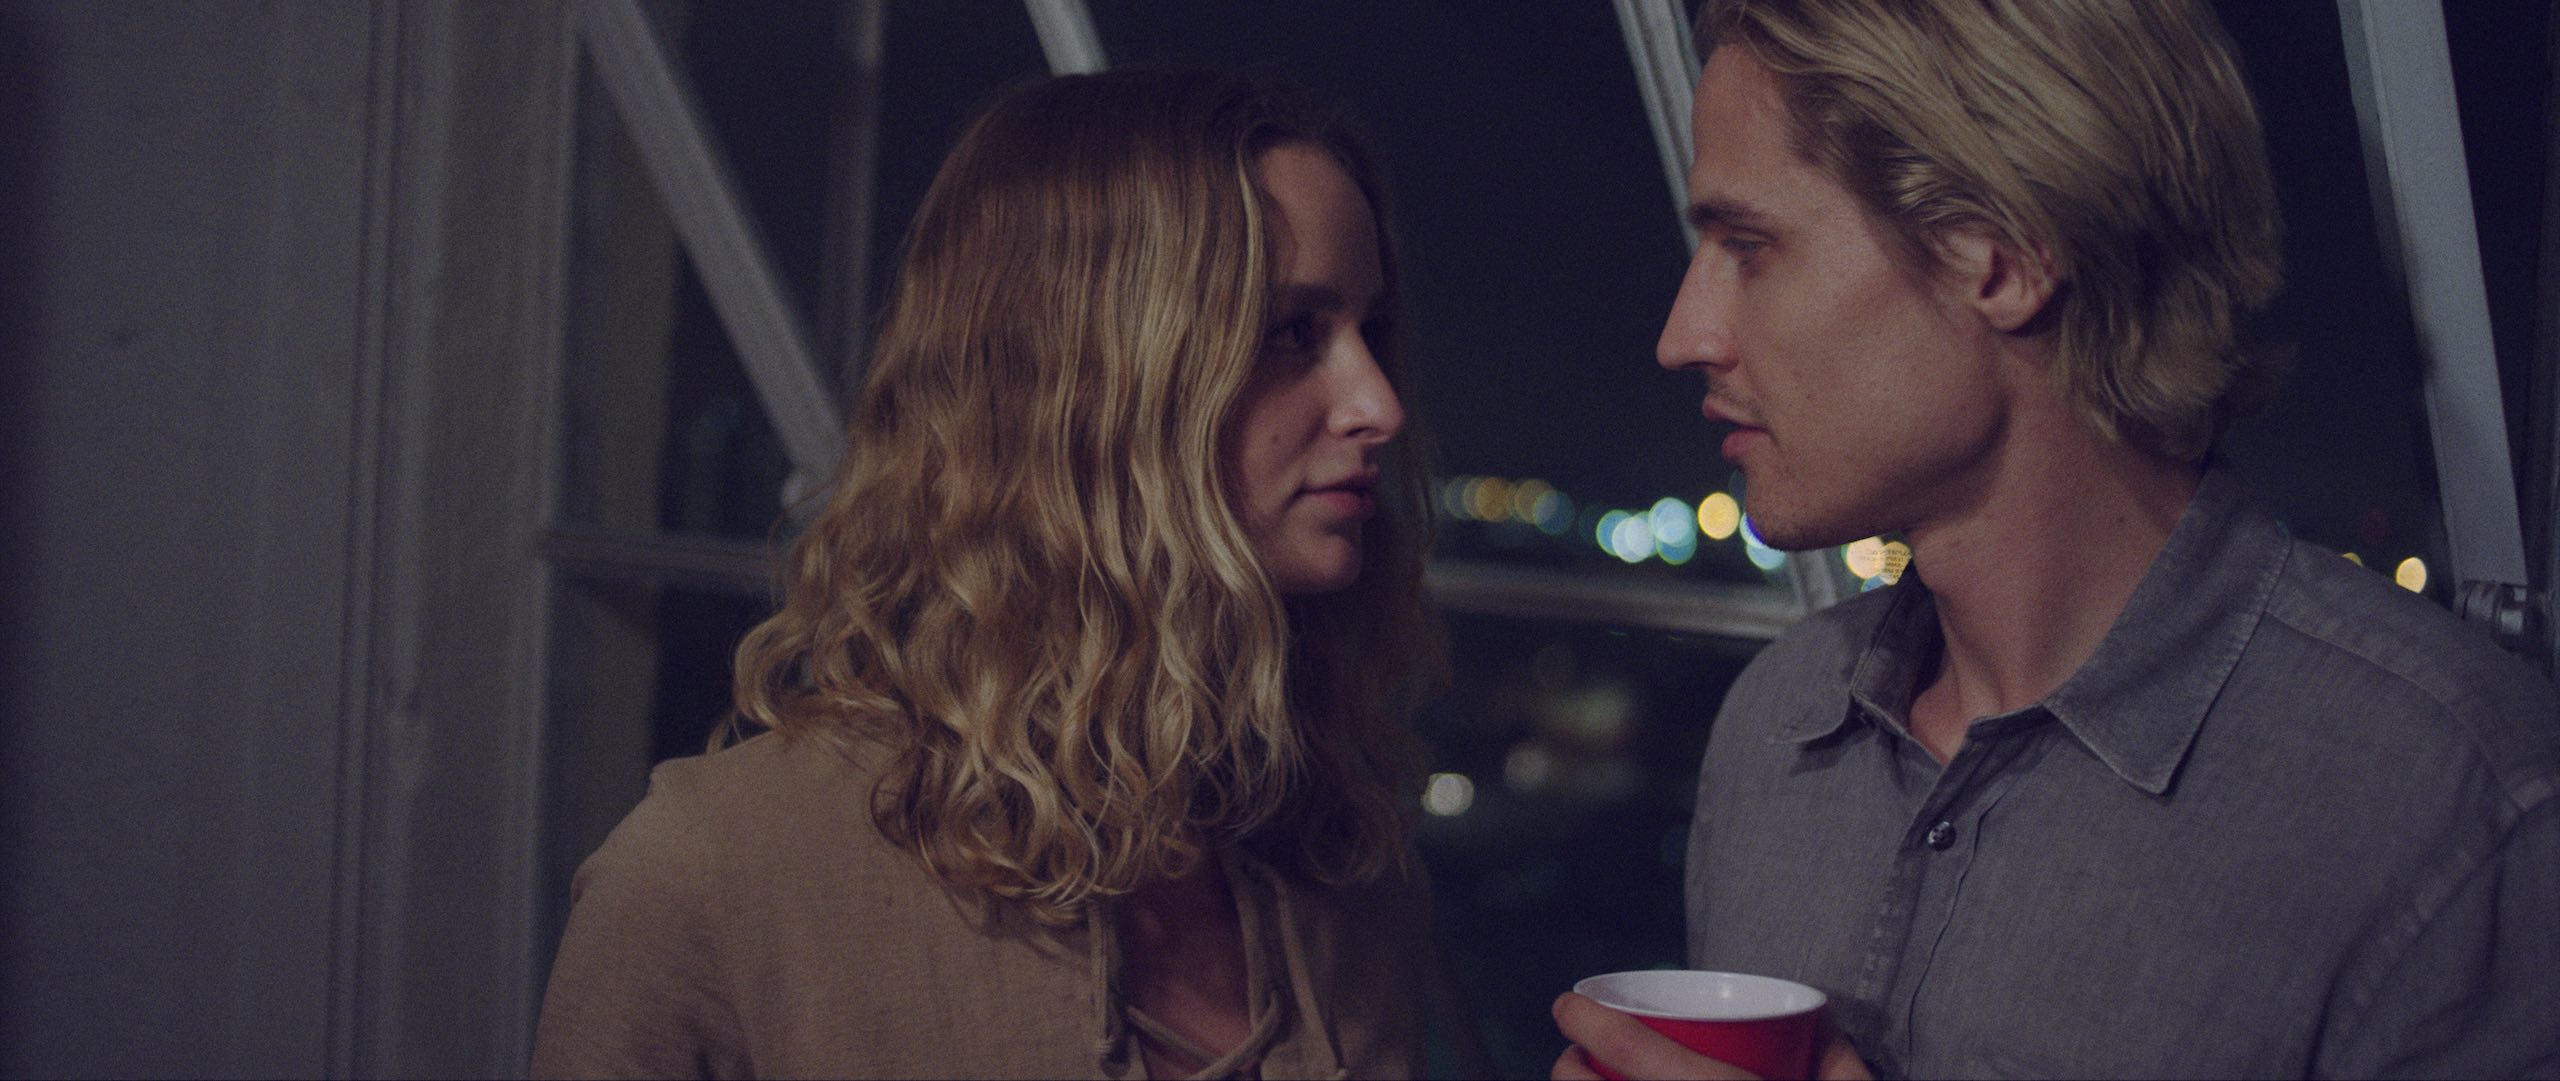 Jellyfish Short Film Produced by C&I Studios Man and woman with blond hair looking at each other by the window with man holding a red cup